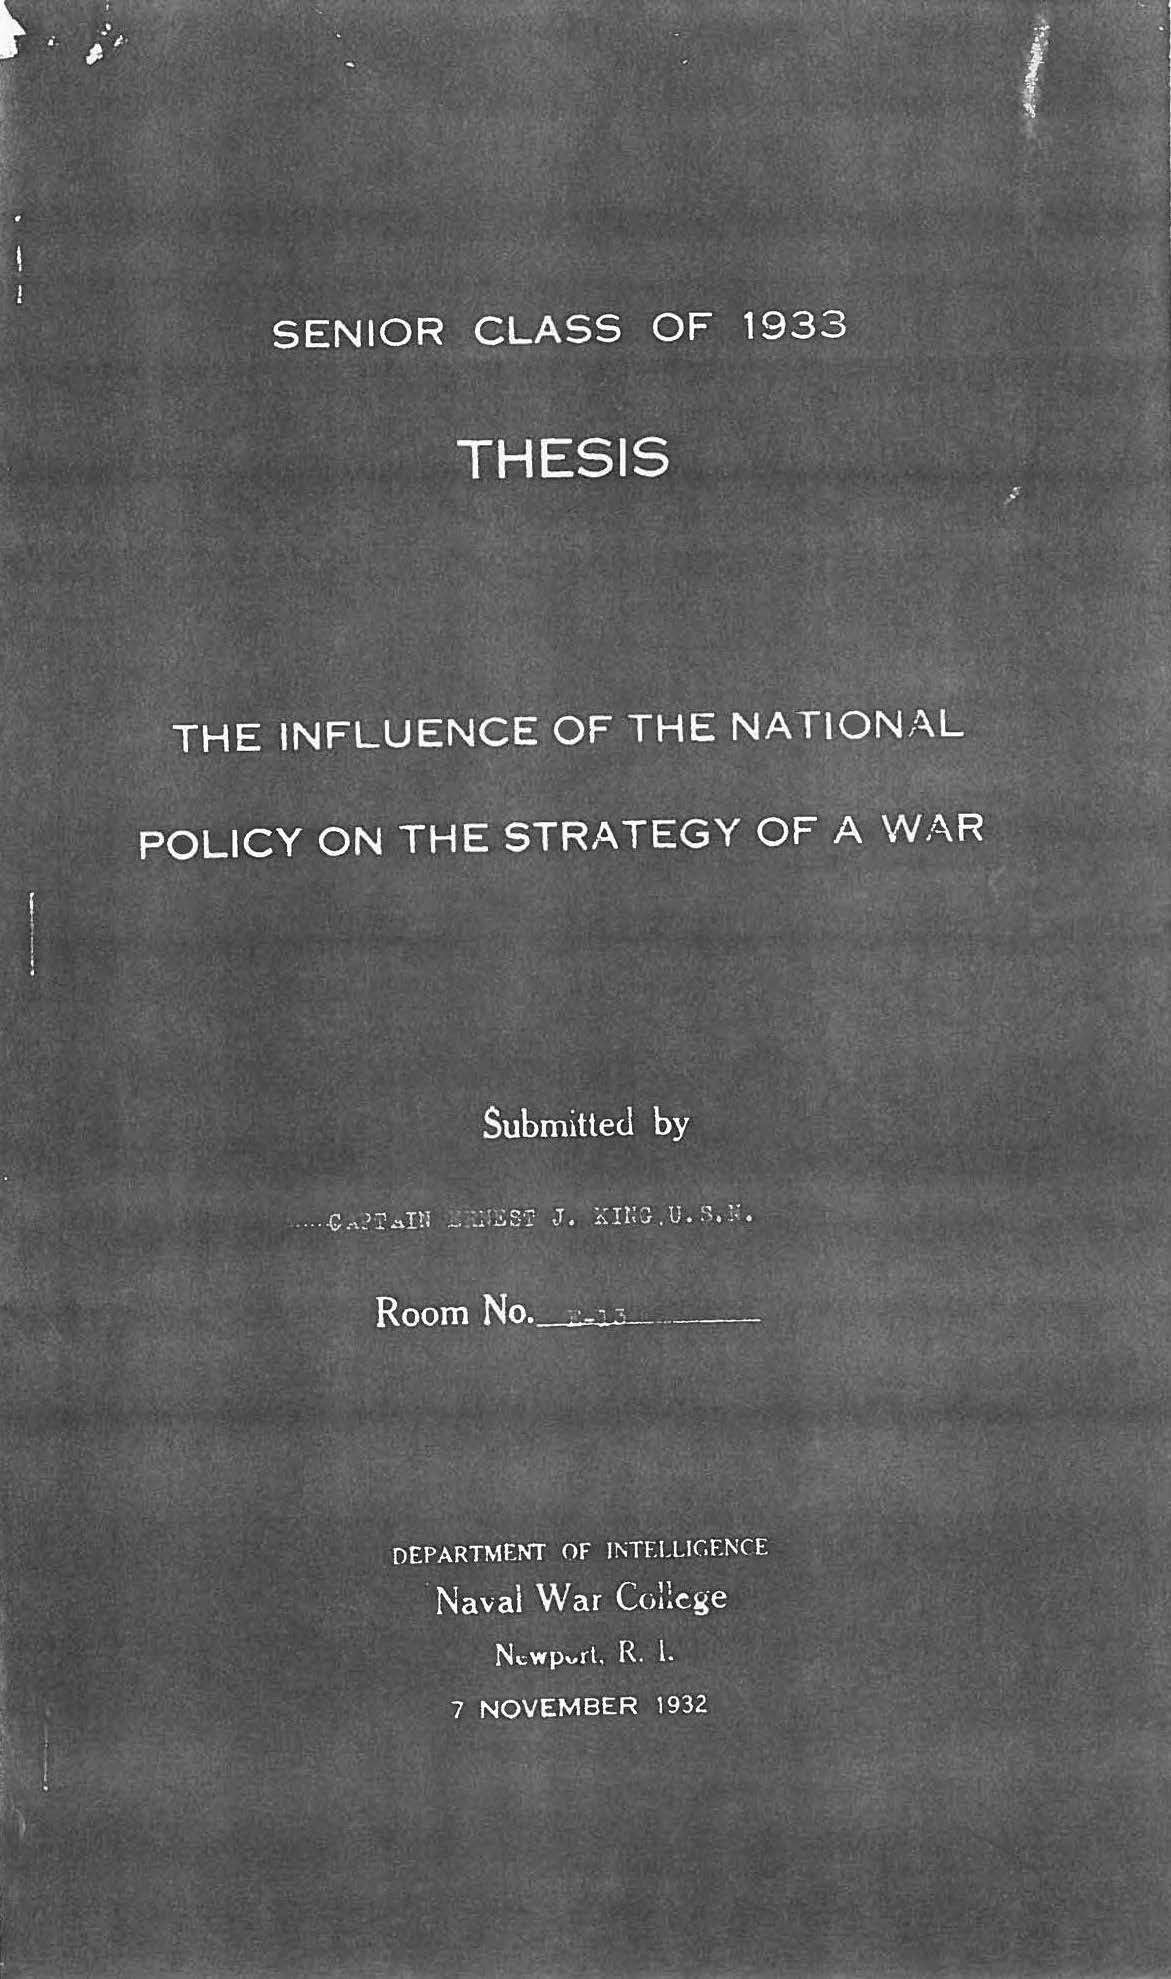 Influence of the National Policy on the Strategy of a War, E.J. King